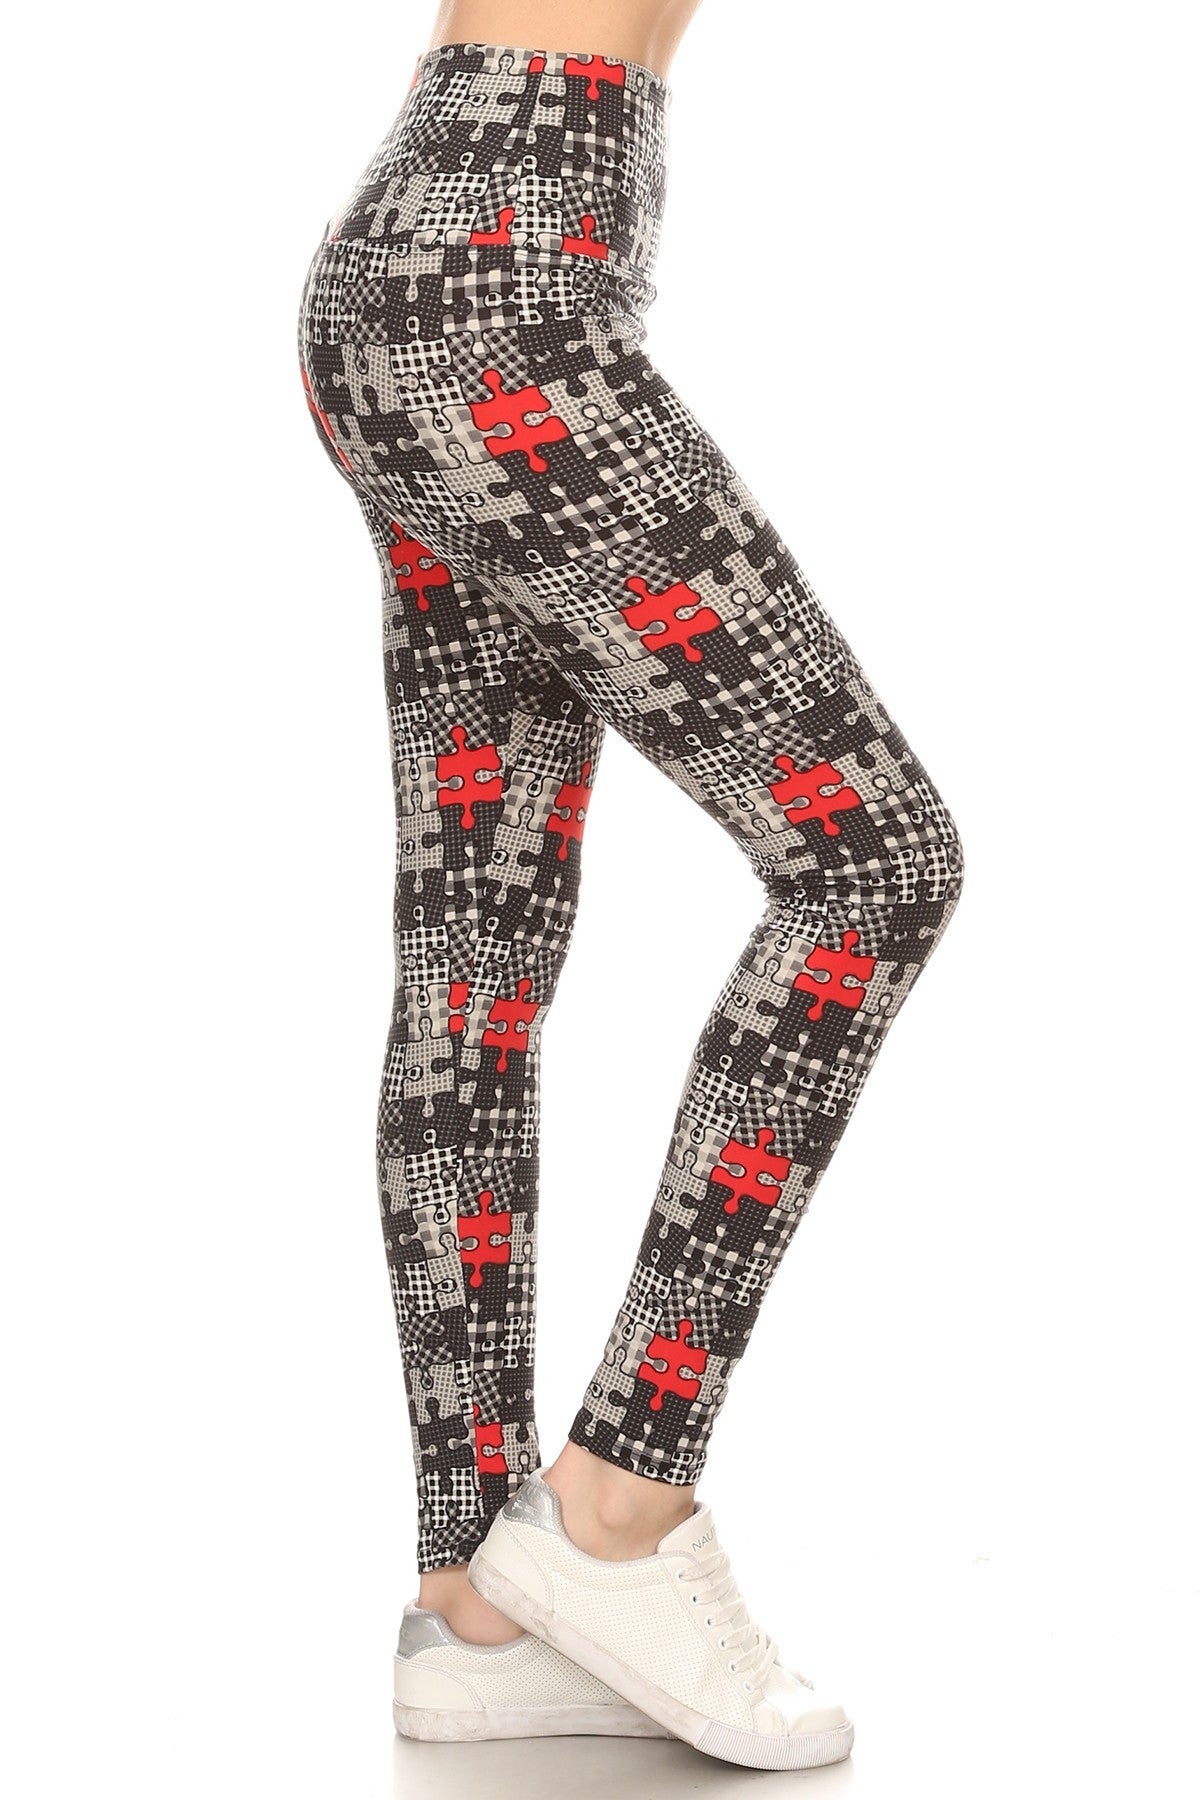 5-inch Long Yoga Style Banded Lined Puzzle Printed Knit Legging With High Waist - Love It Clothing